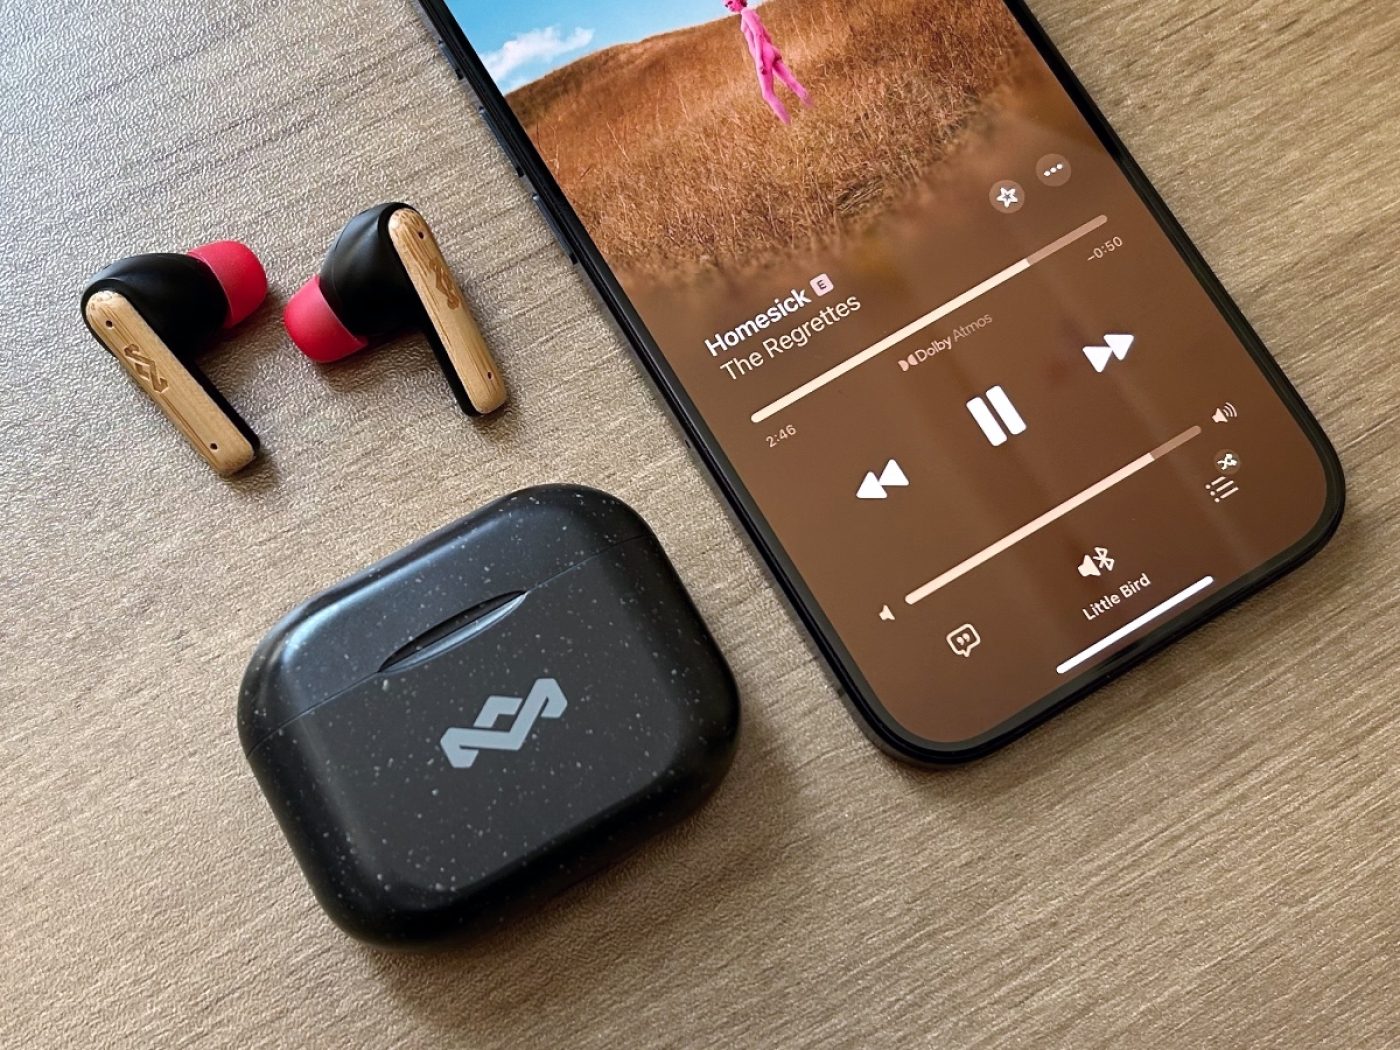 House of Marley Little Bird review: True wireless earbuds on a budget